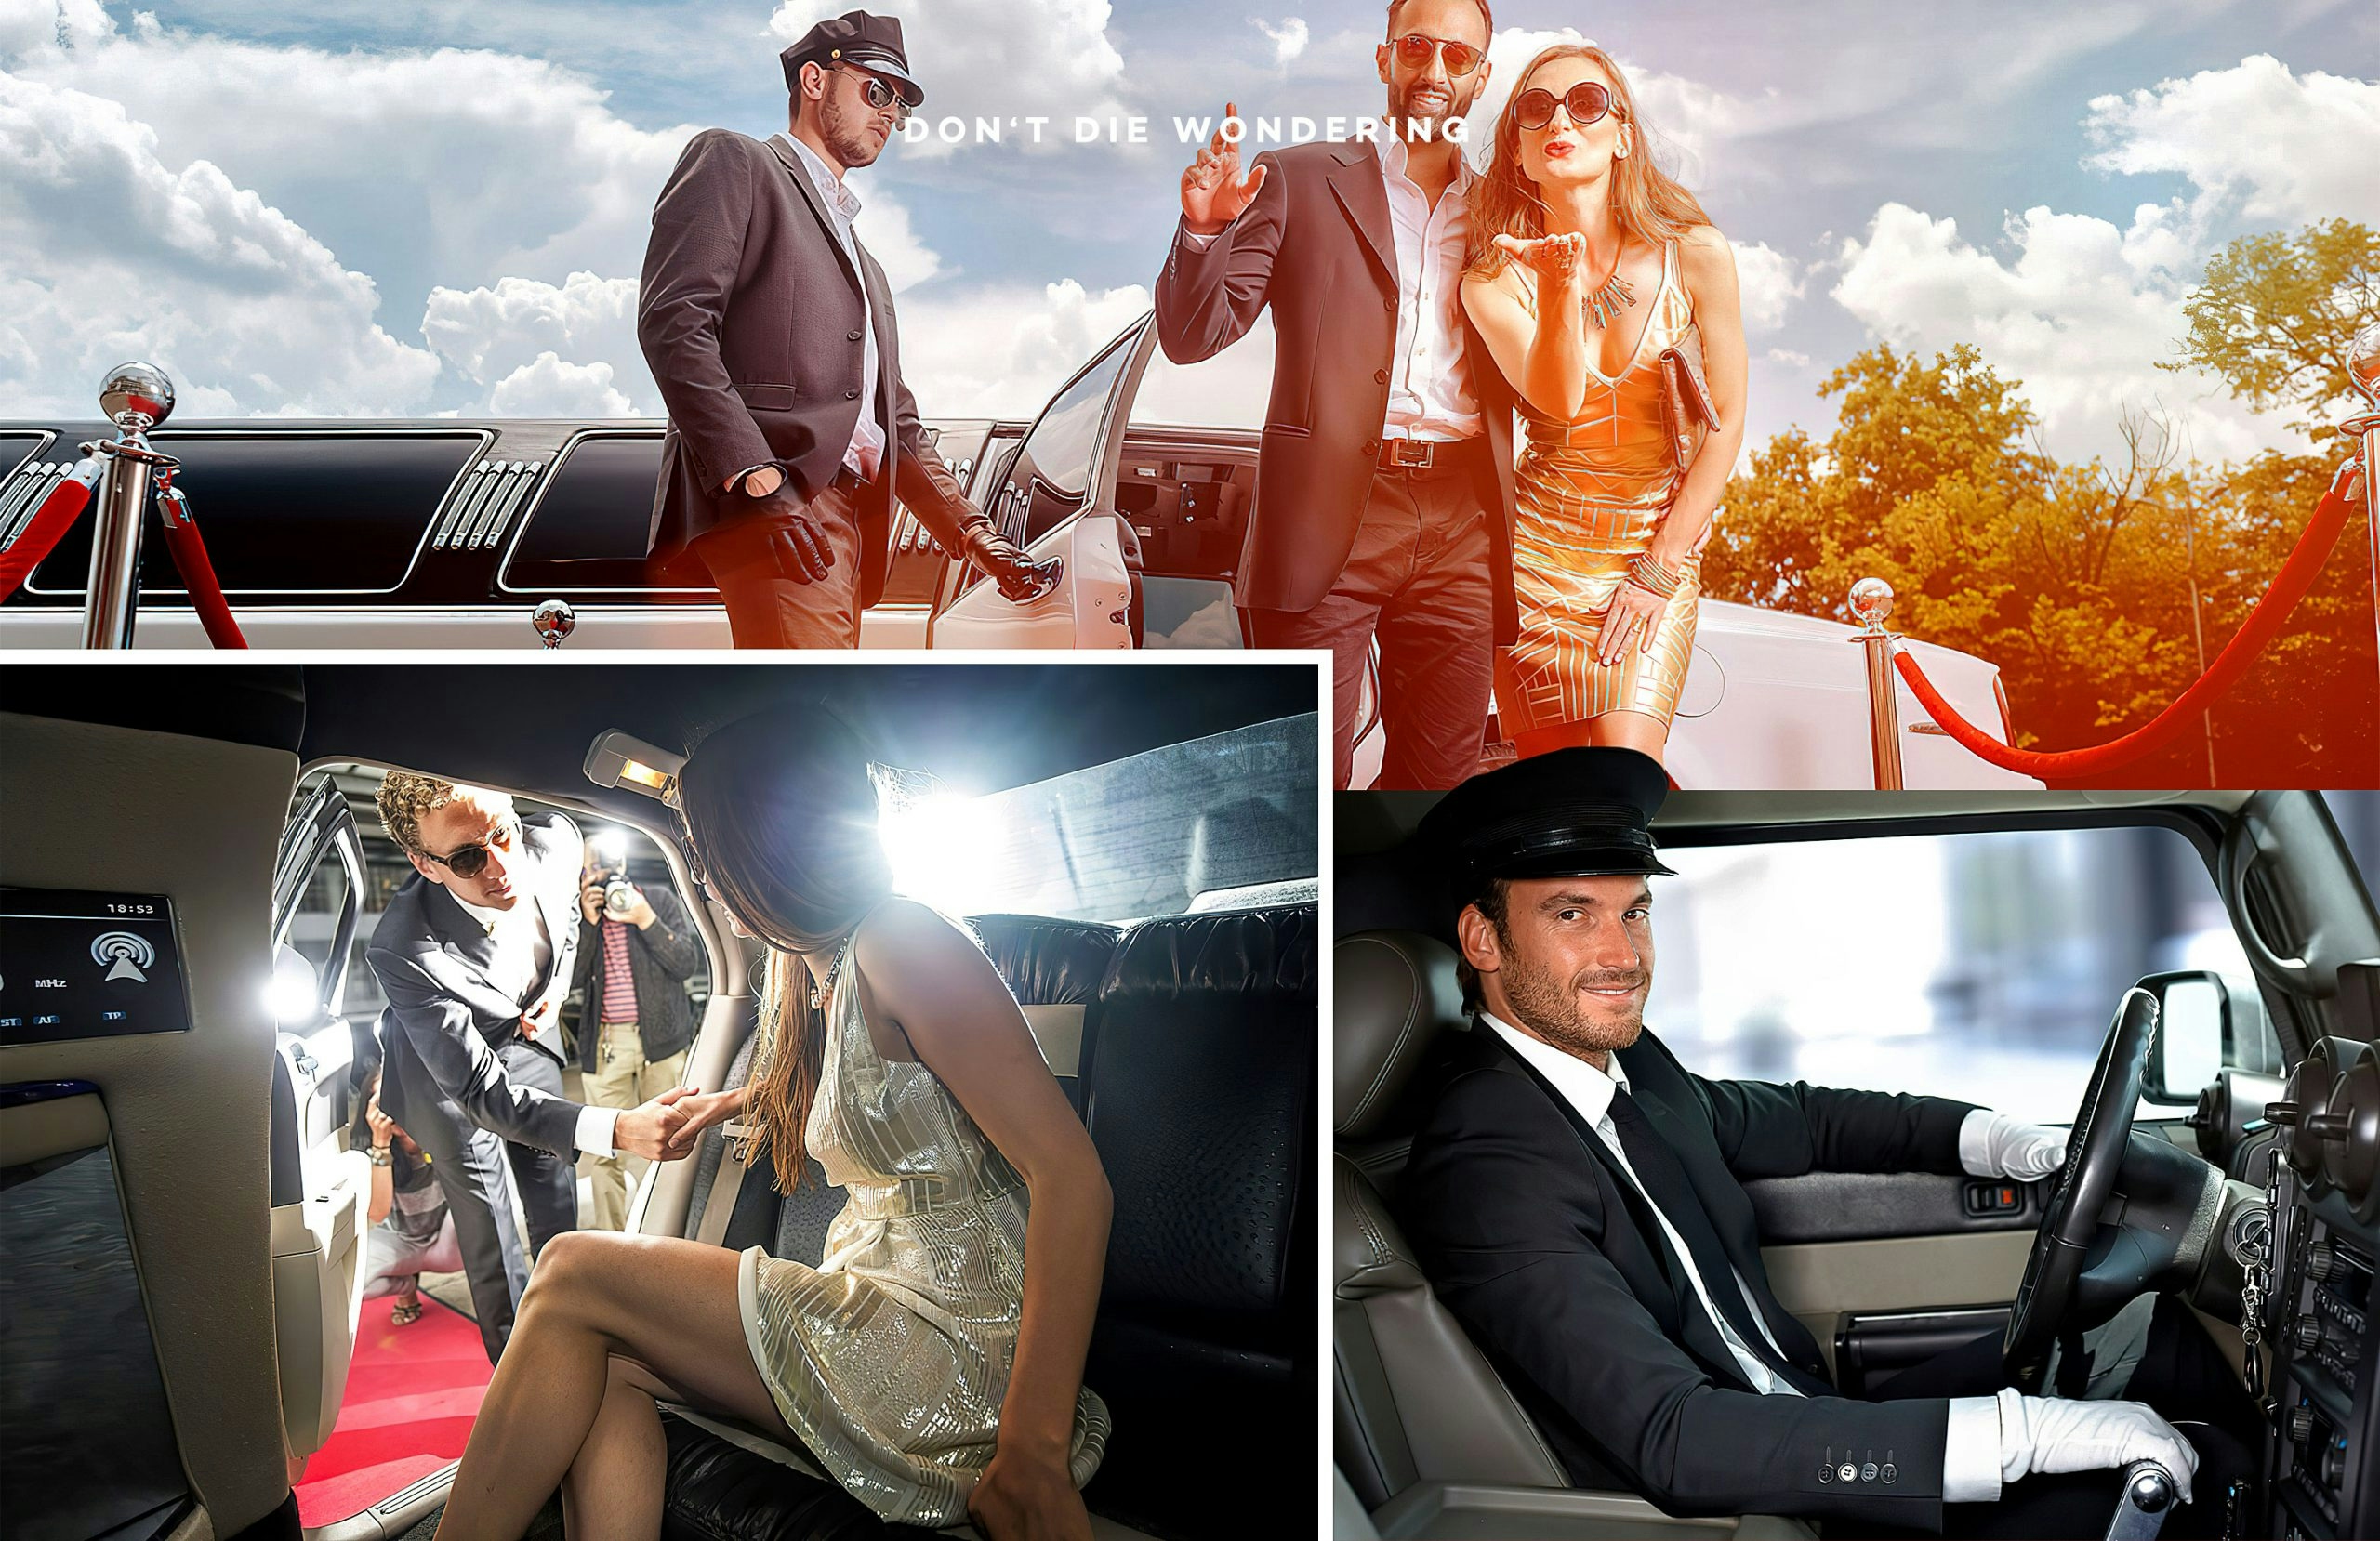 The Perfect Luxury Limousine Is Great For Arriving At A Party Like A Boss